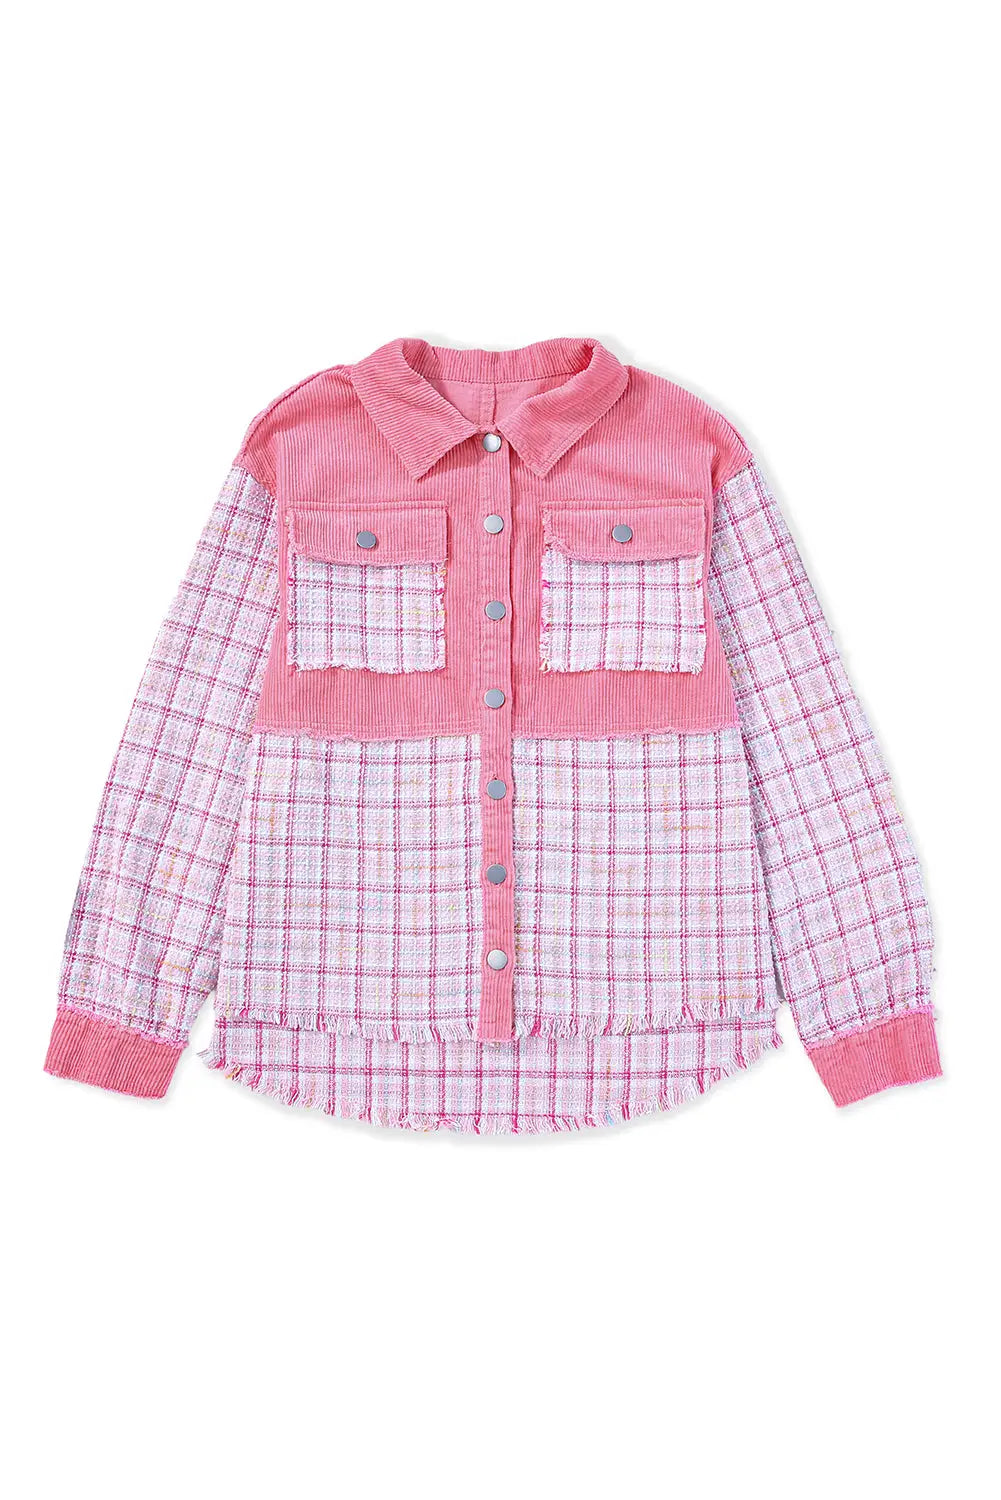 Rose frayed tweed plaid patchwork buttoned jacket - shackets